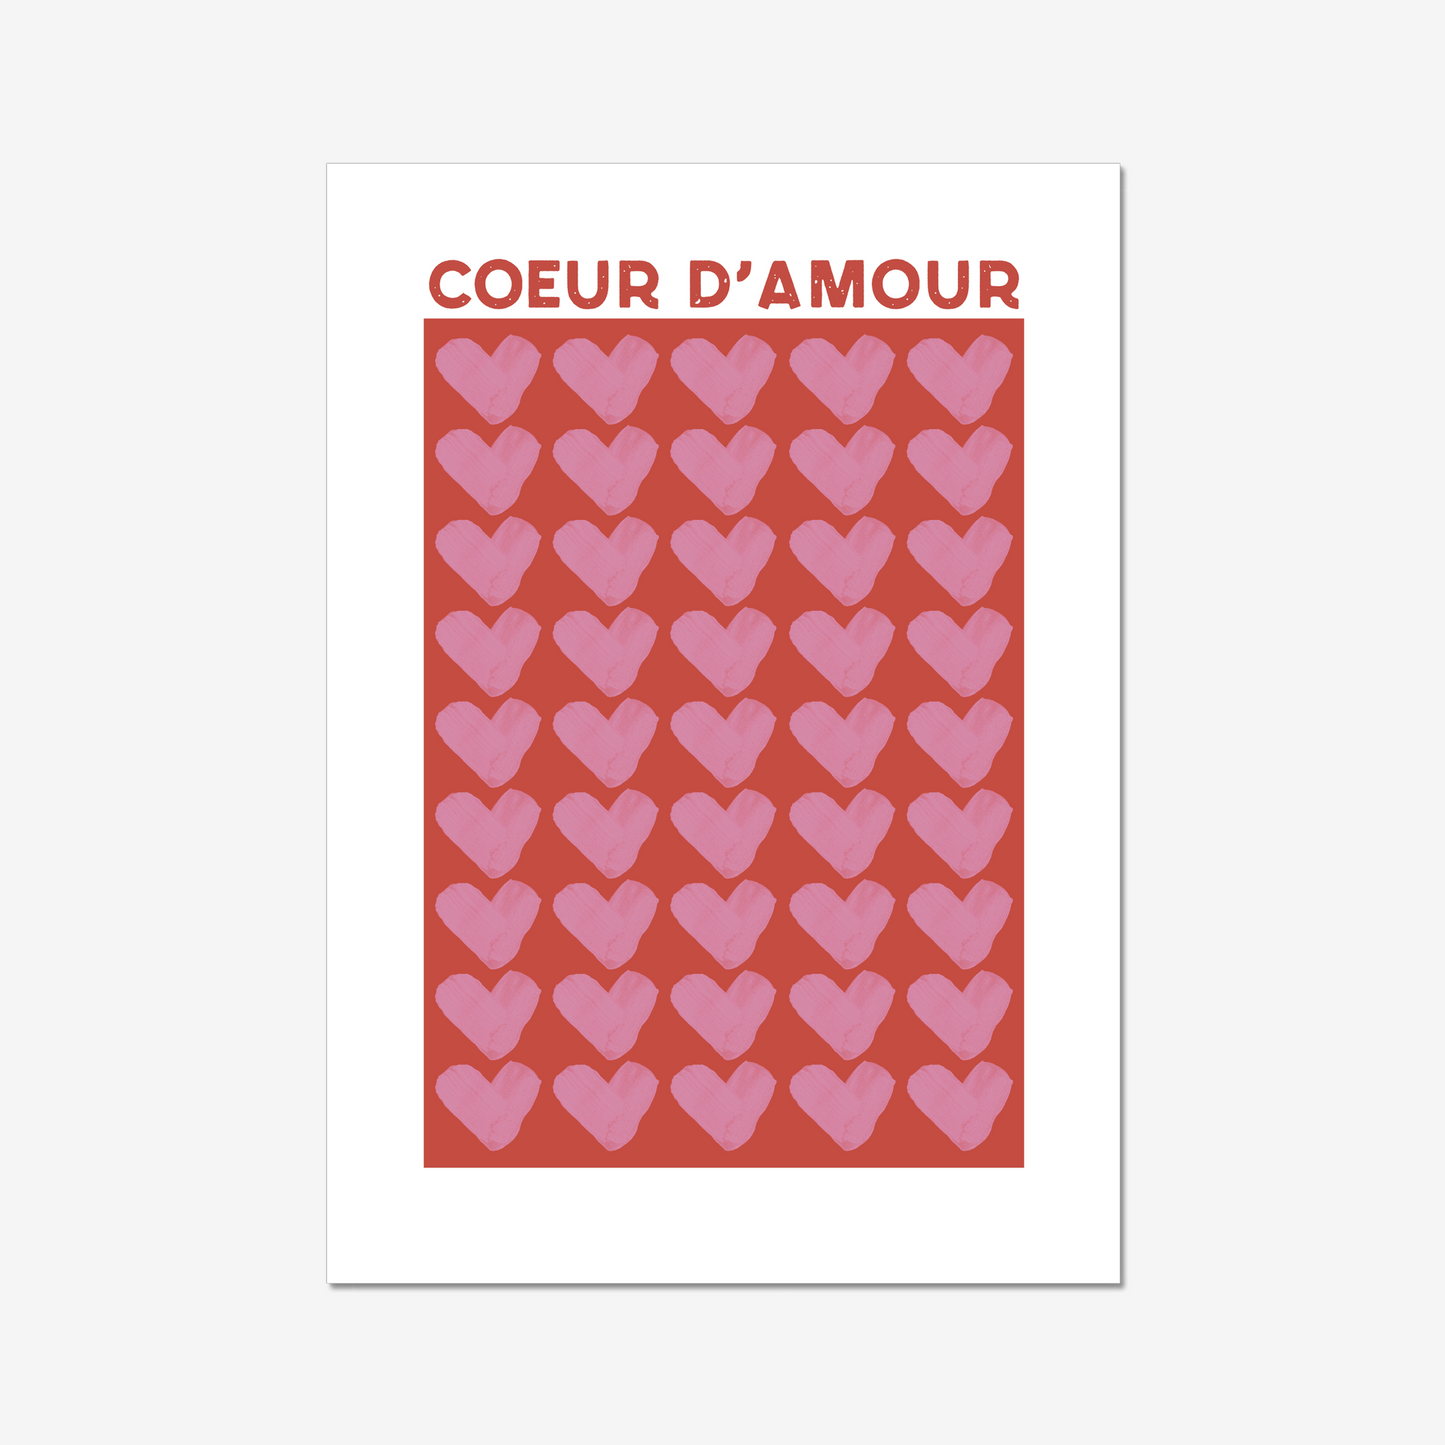 COEUR D'AMOUR, Love Hearts Art Print Poster  - Cuddles In The Kitchen